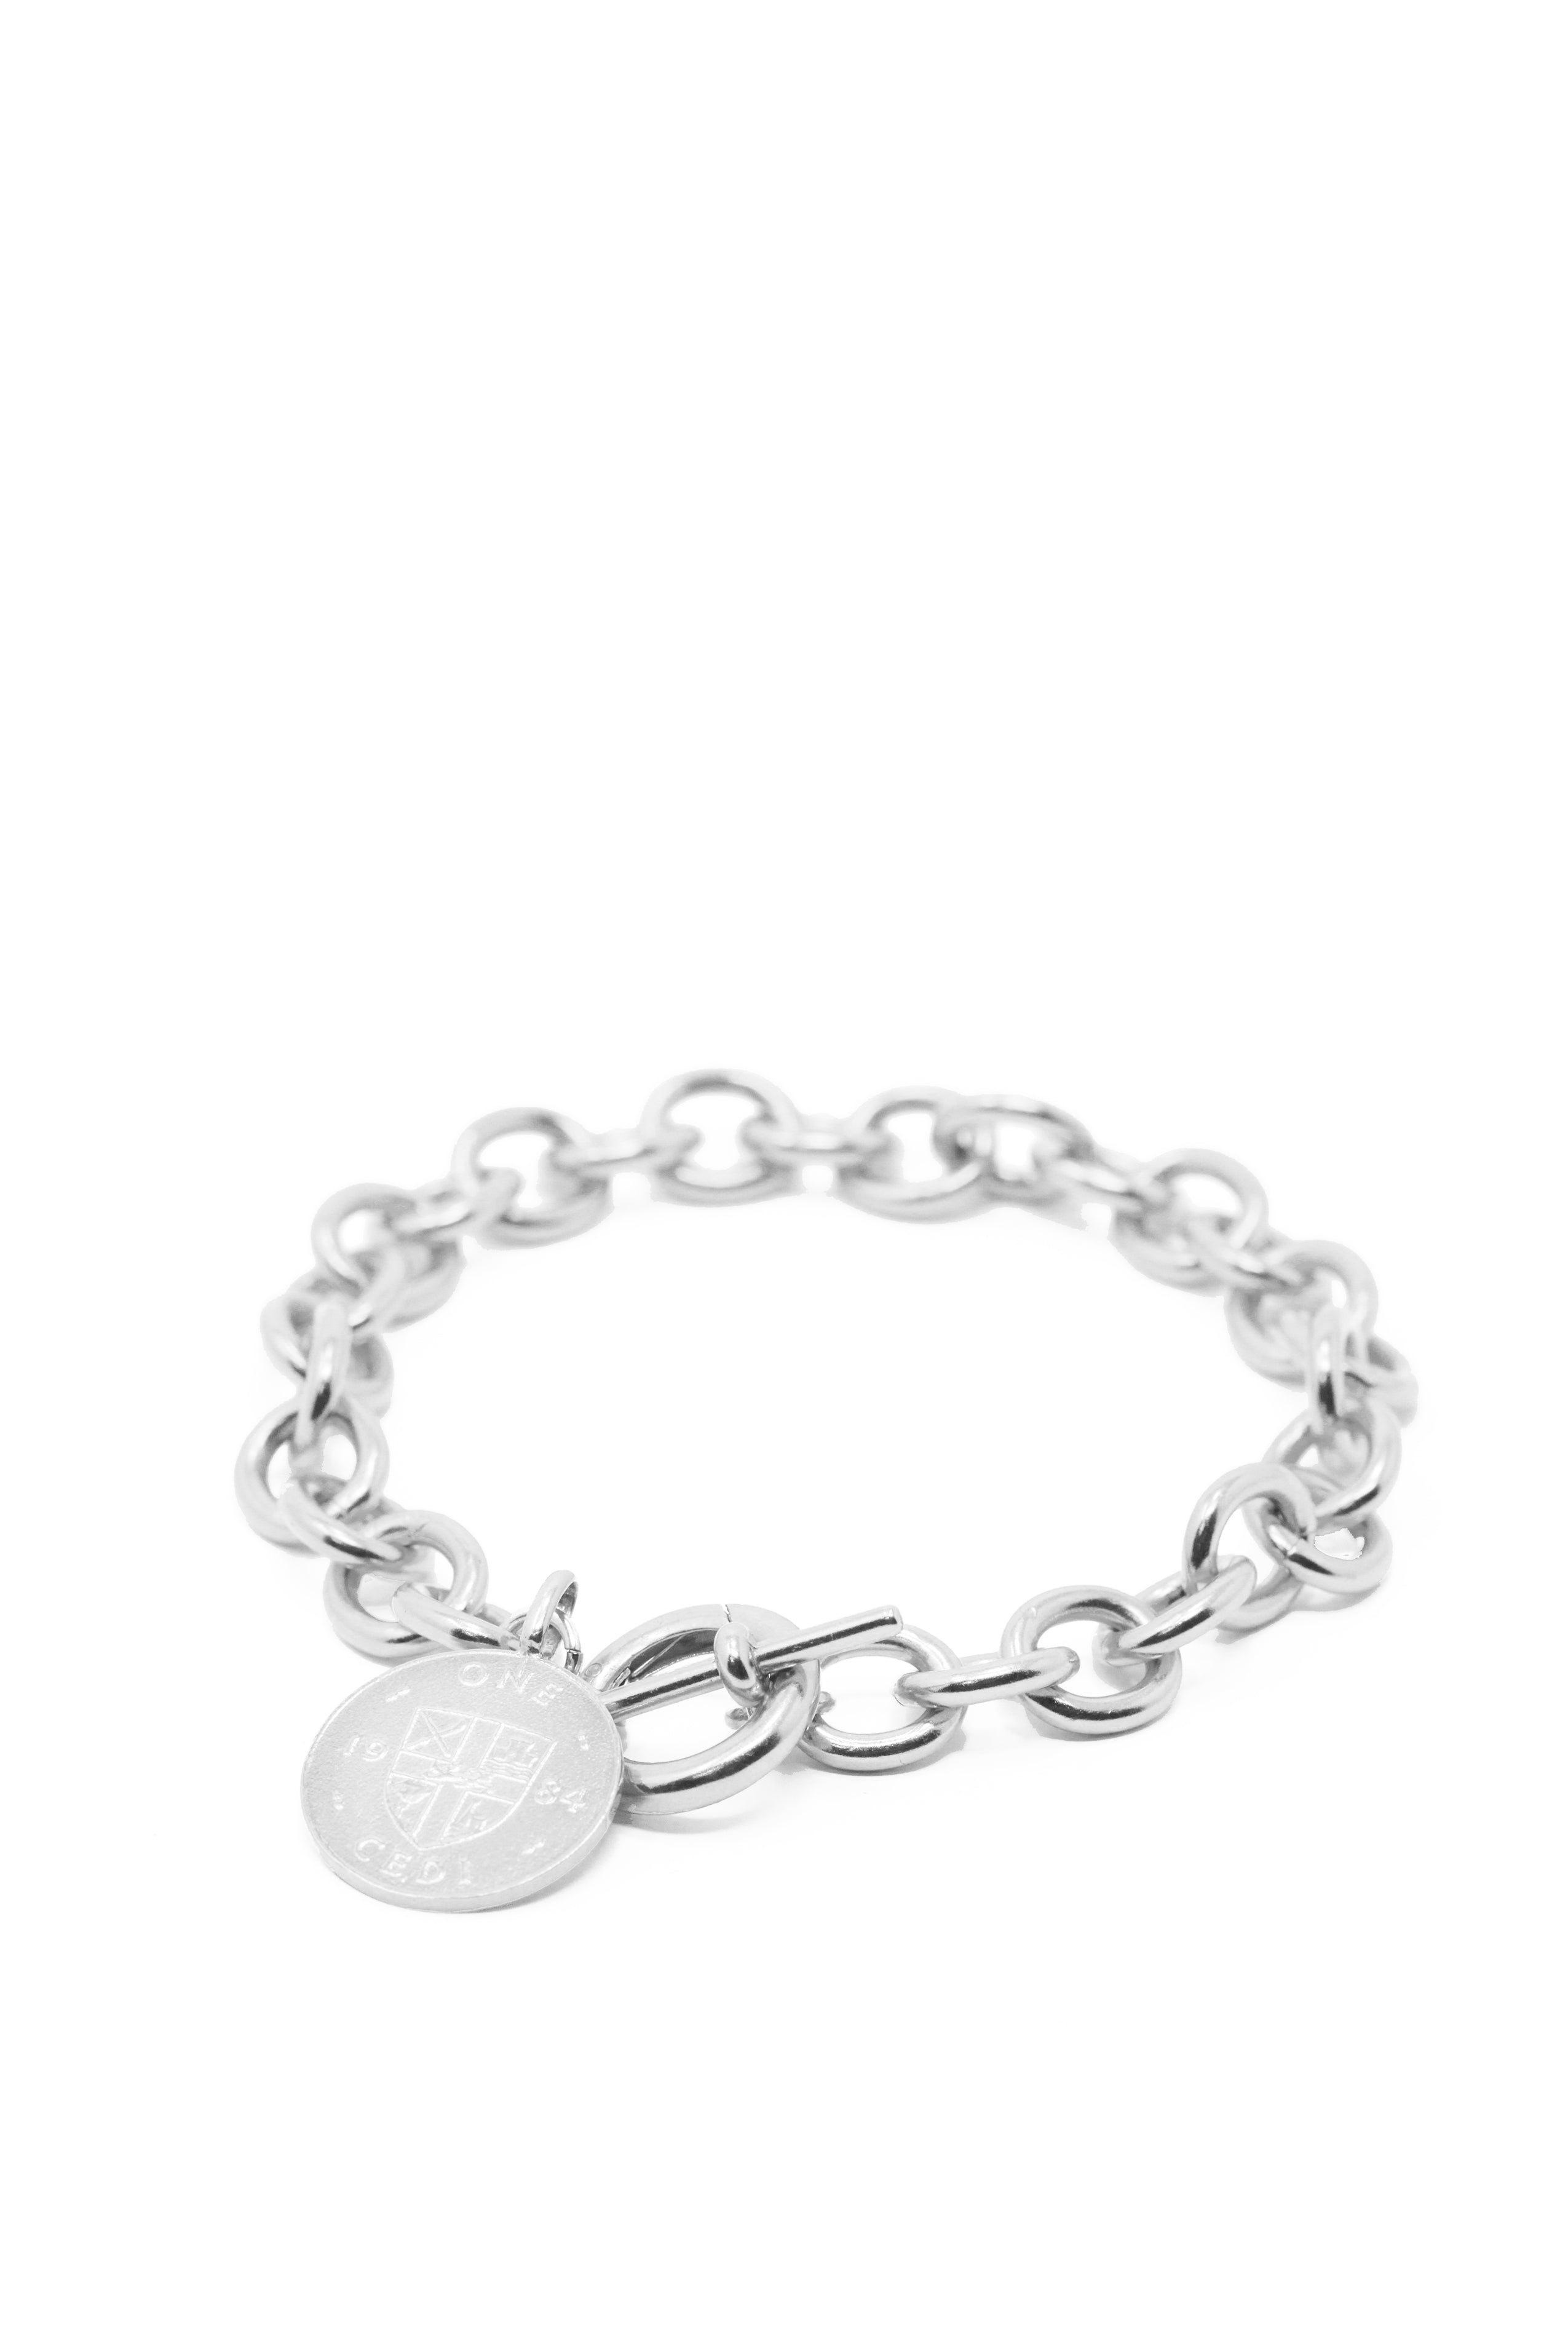 THE TOGGLE IV Bracelet with Coin Charm – omiwoods